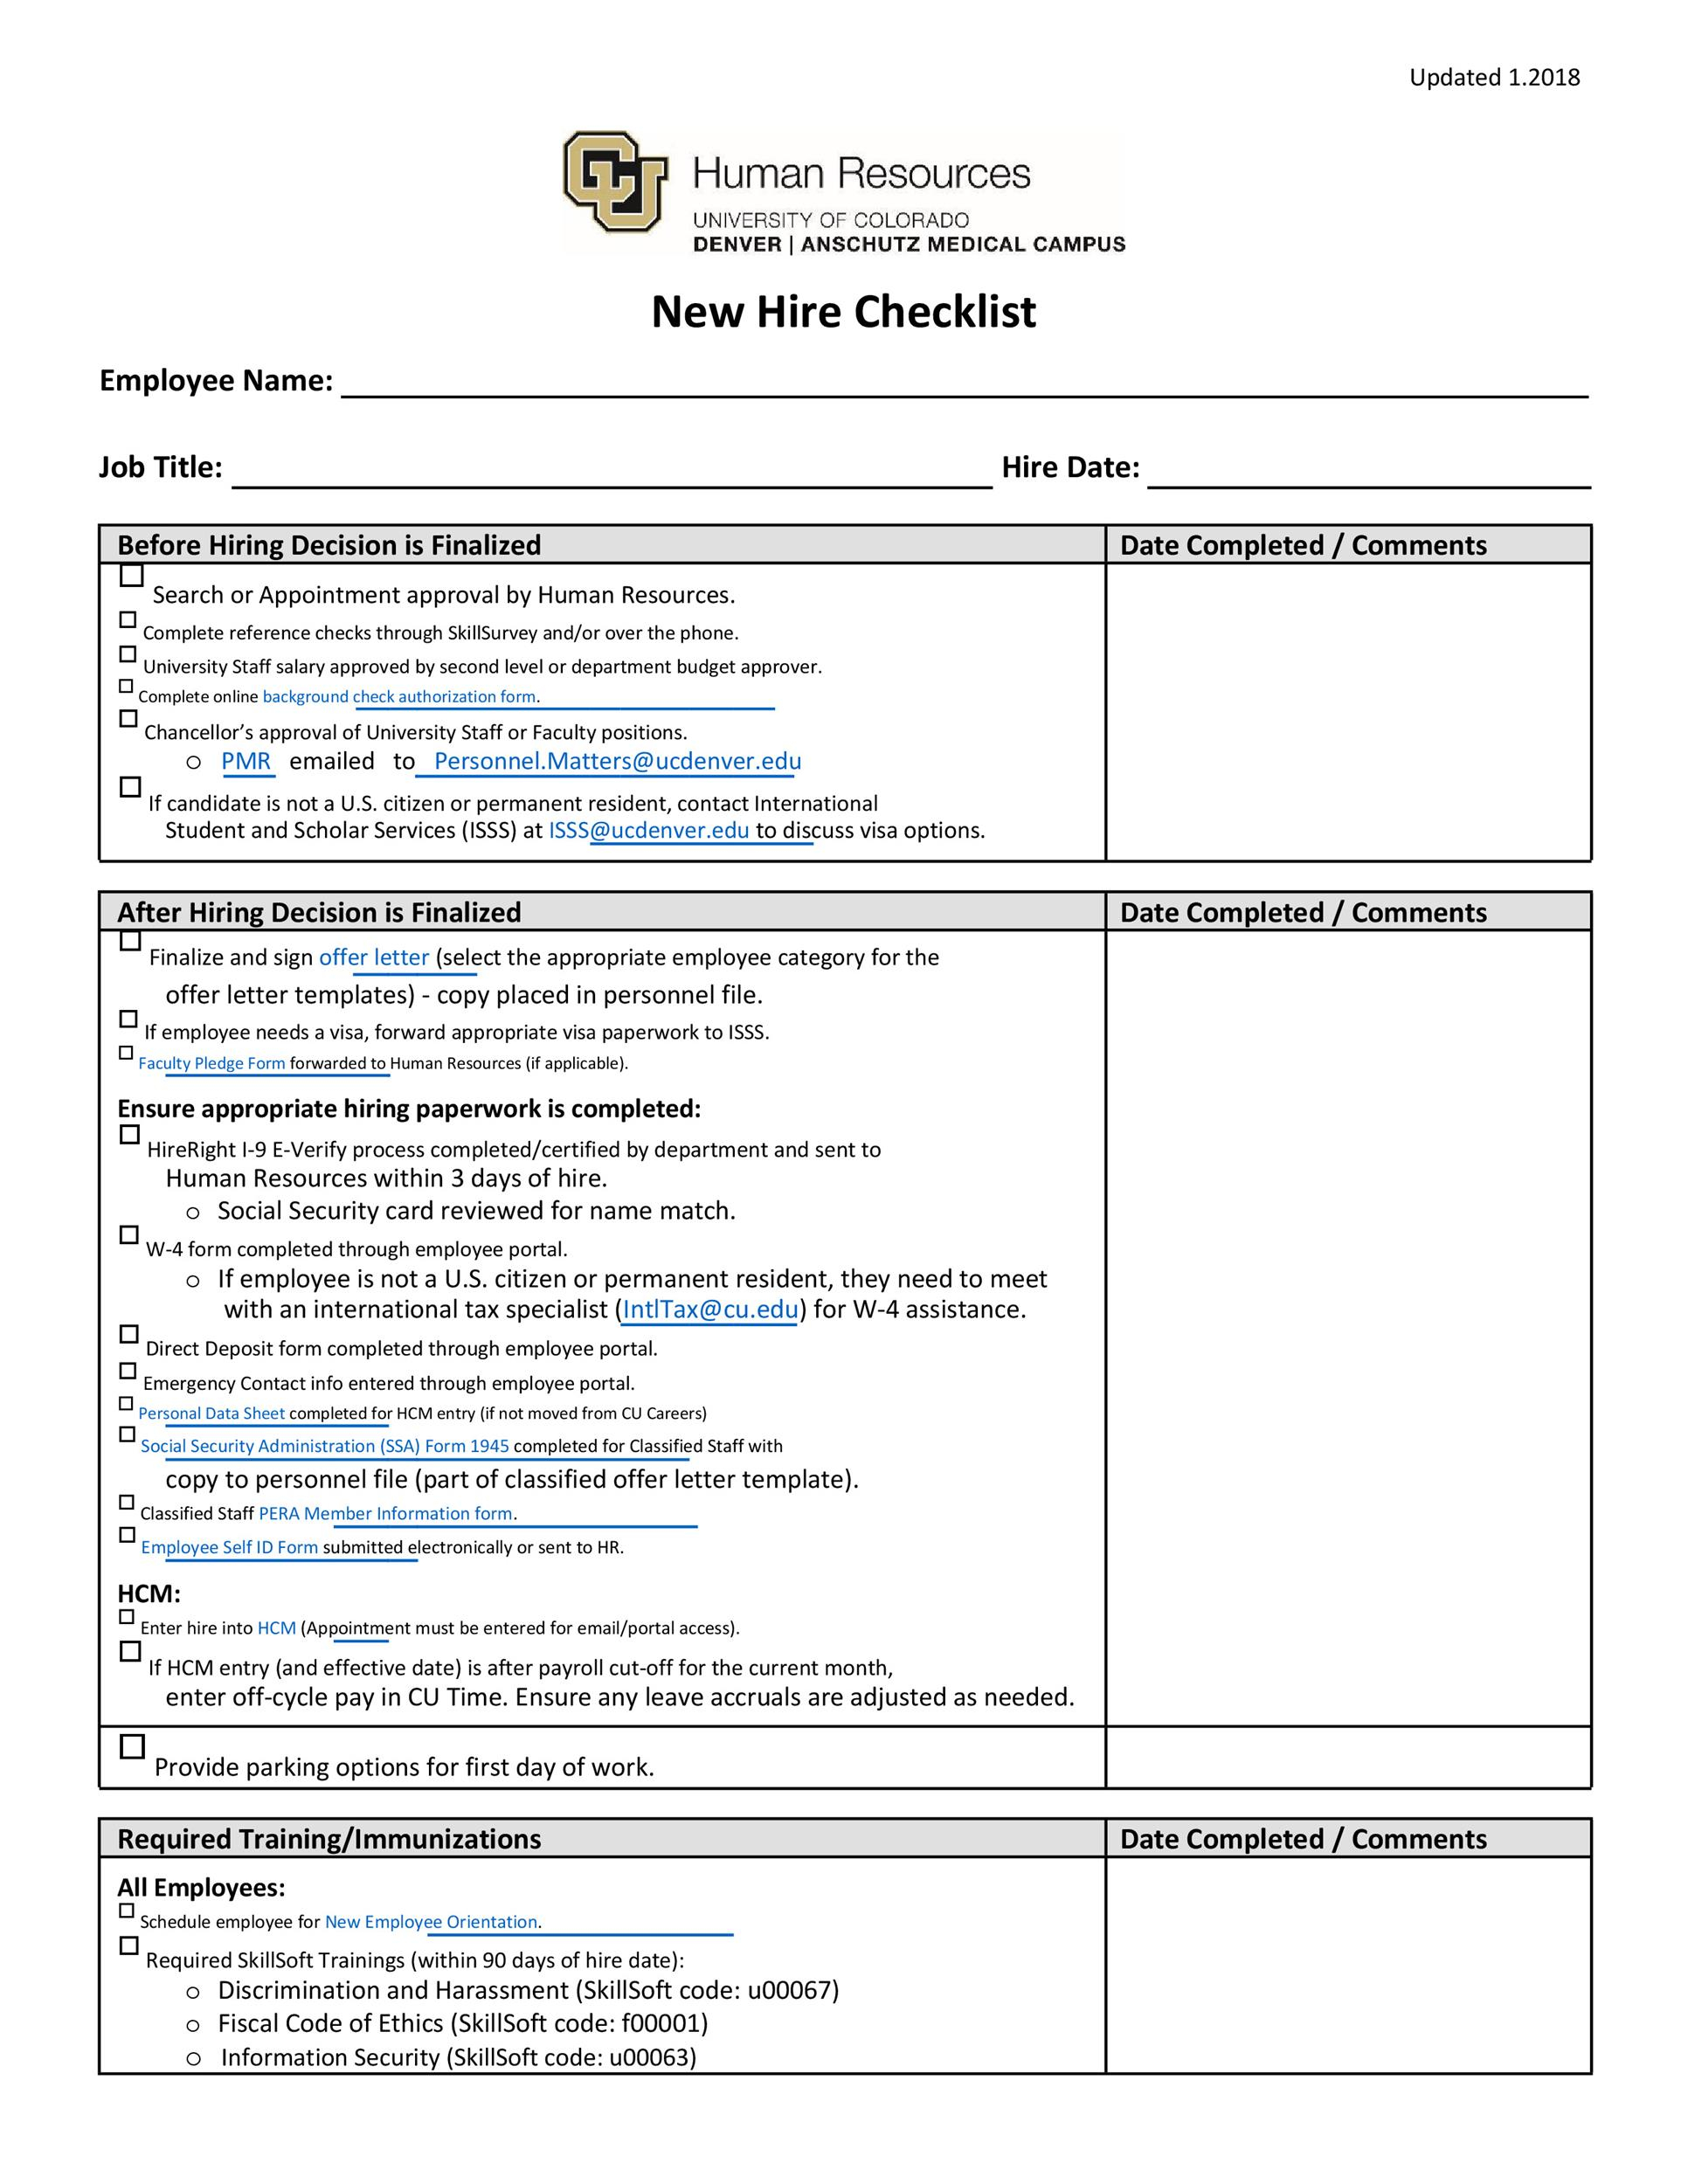 10 Useful New Hire Checklist Templates & Forms ᐅ TemplateLab Intended For Hr Onboarding Checklist Template In Hr Onboarding Checklist Template